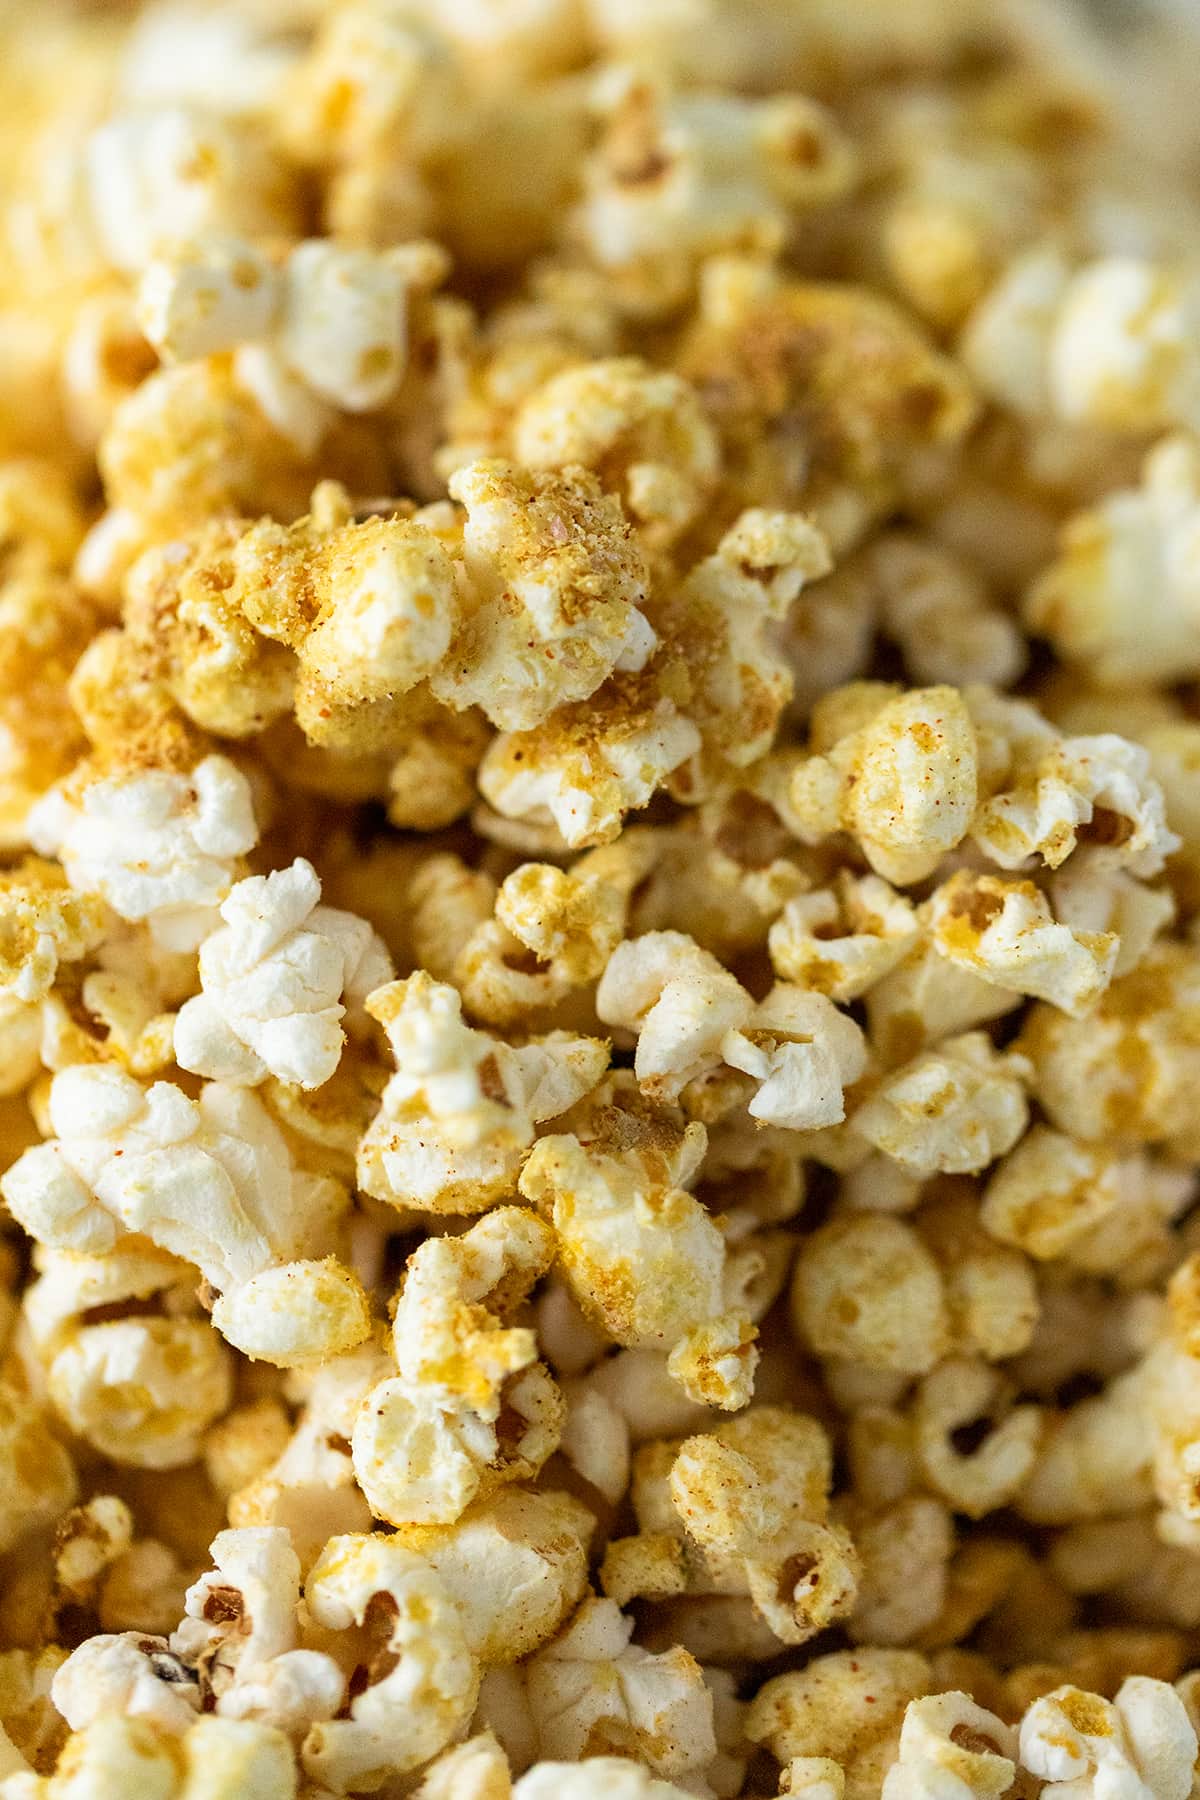 The Best Vegan Popcorn - a delicious blend of nutritional yeast, garlic, onion powder, and other spices sprinkled over popcorn made with avocado oil.